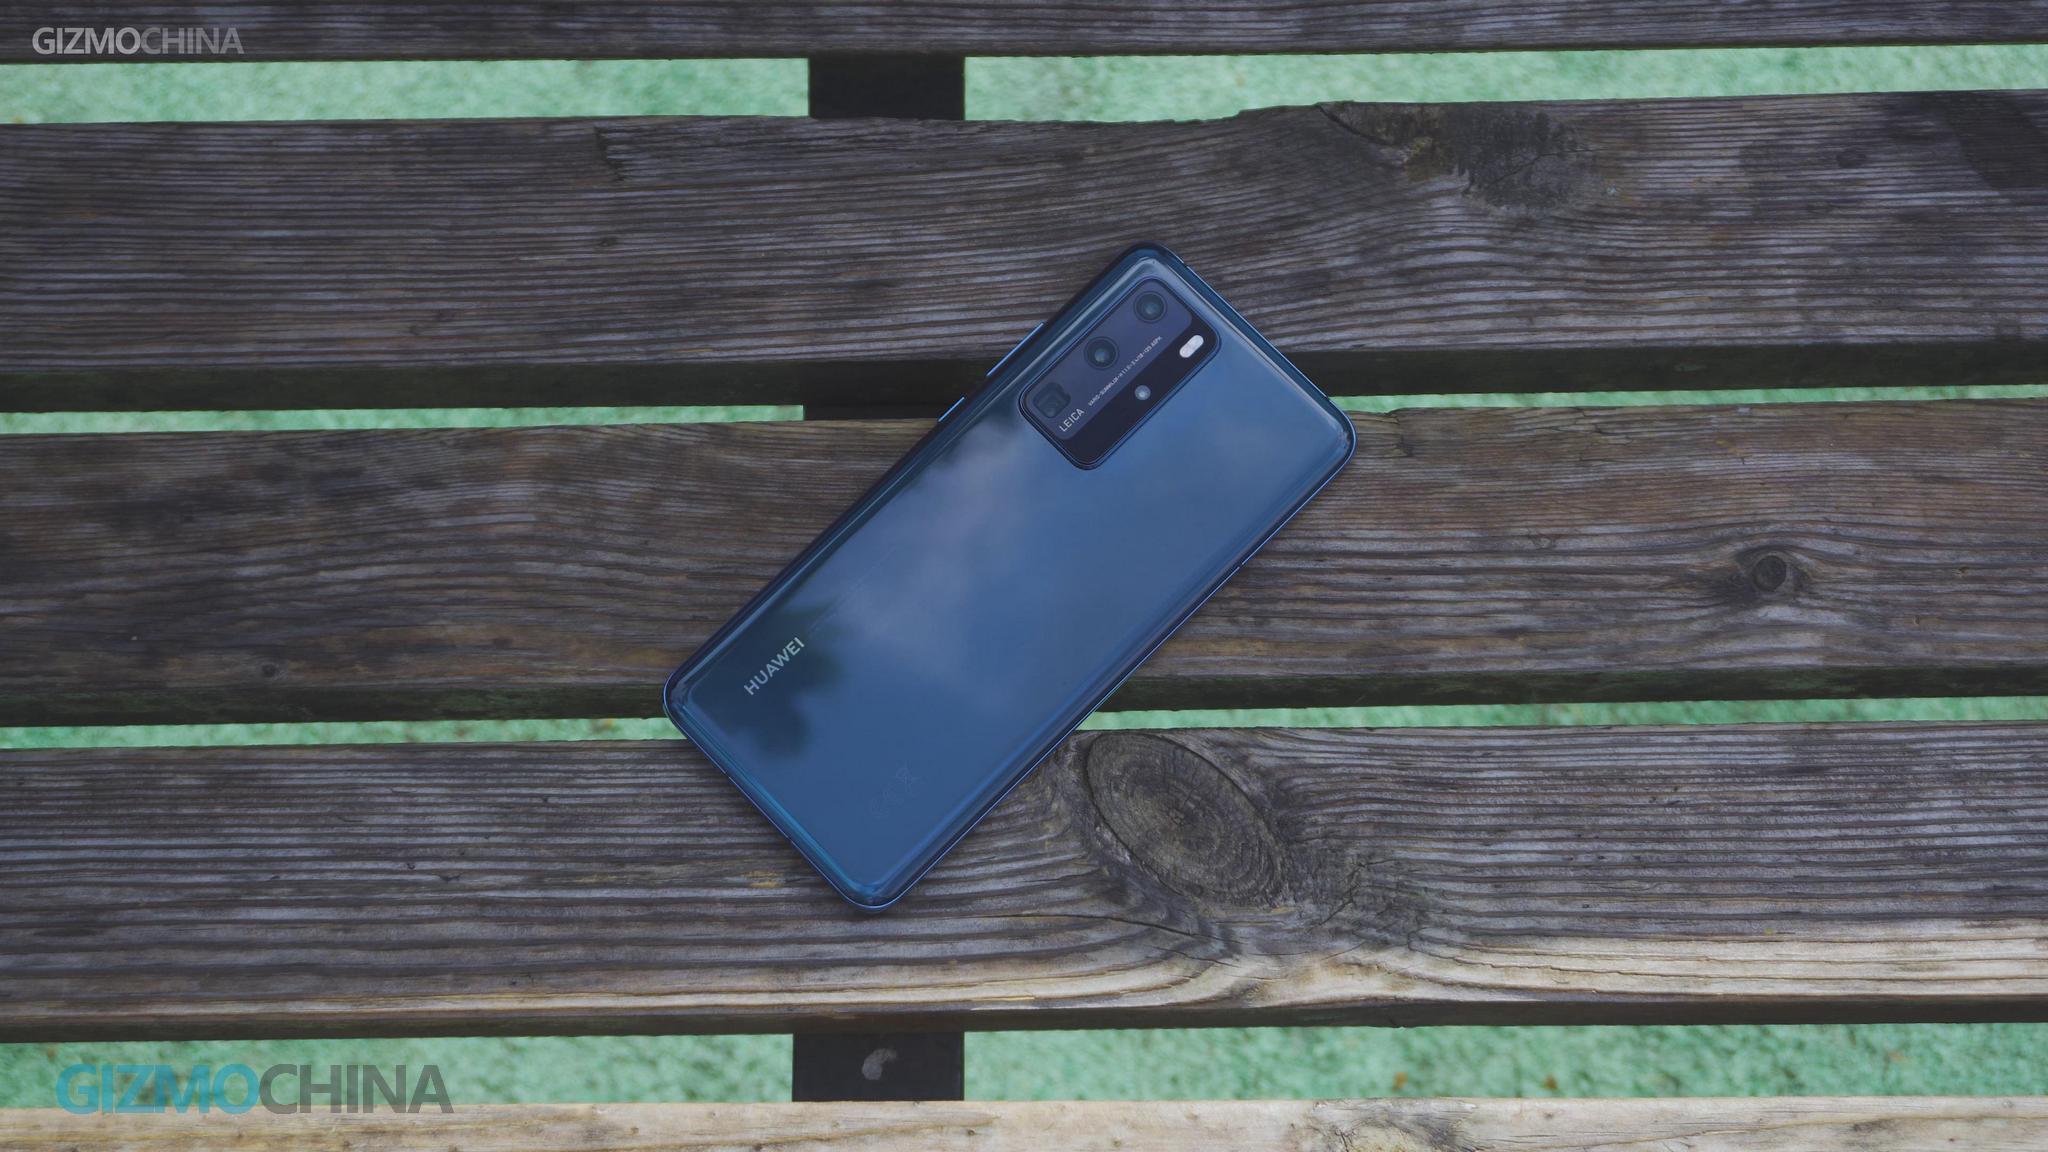 Huawei P40 Pro will launch in Canada on July 10 with freebies like Watch GT 2